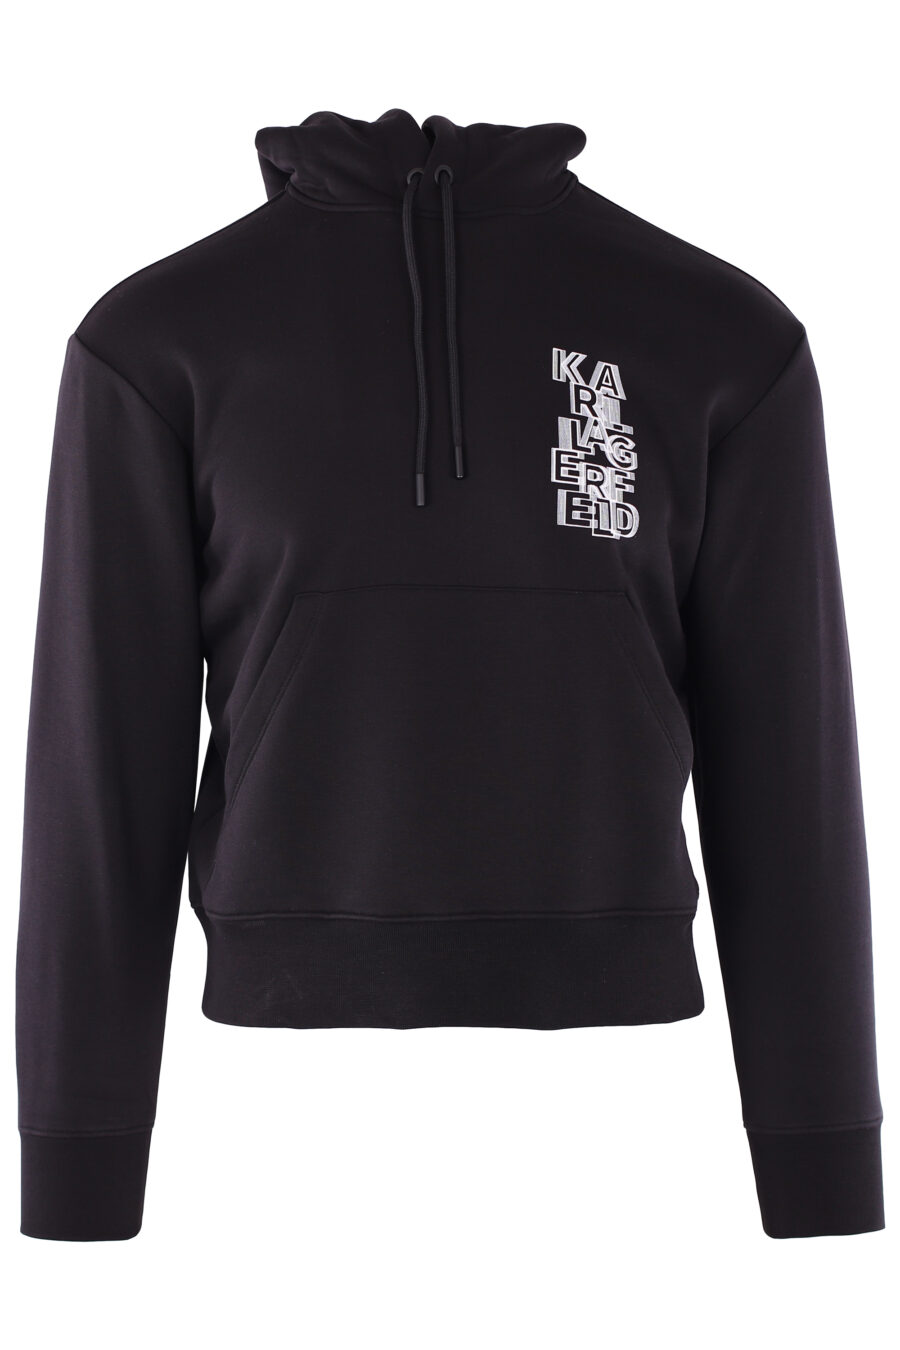 Black hoodie with graphic logo - IMG 6410